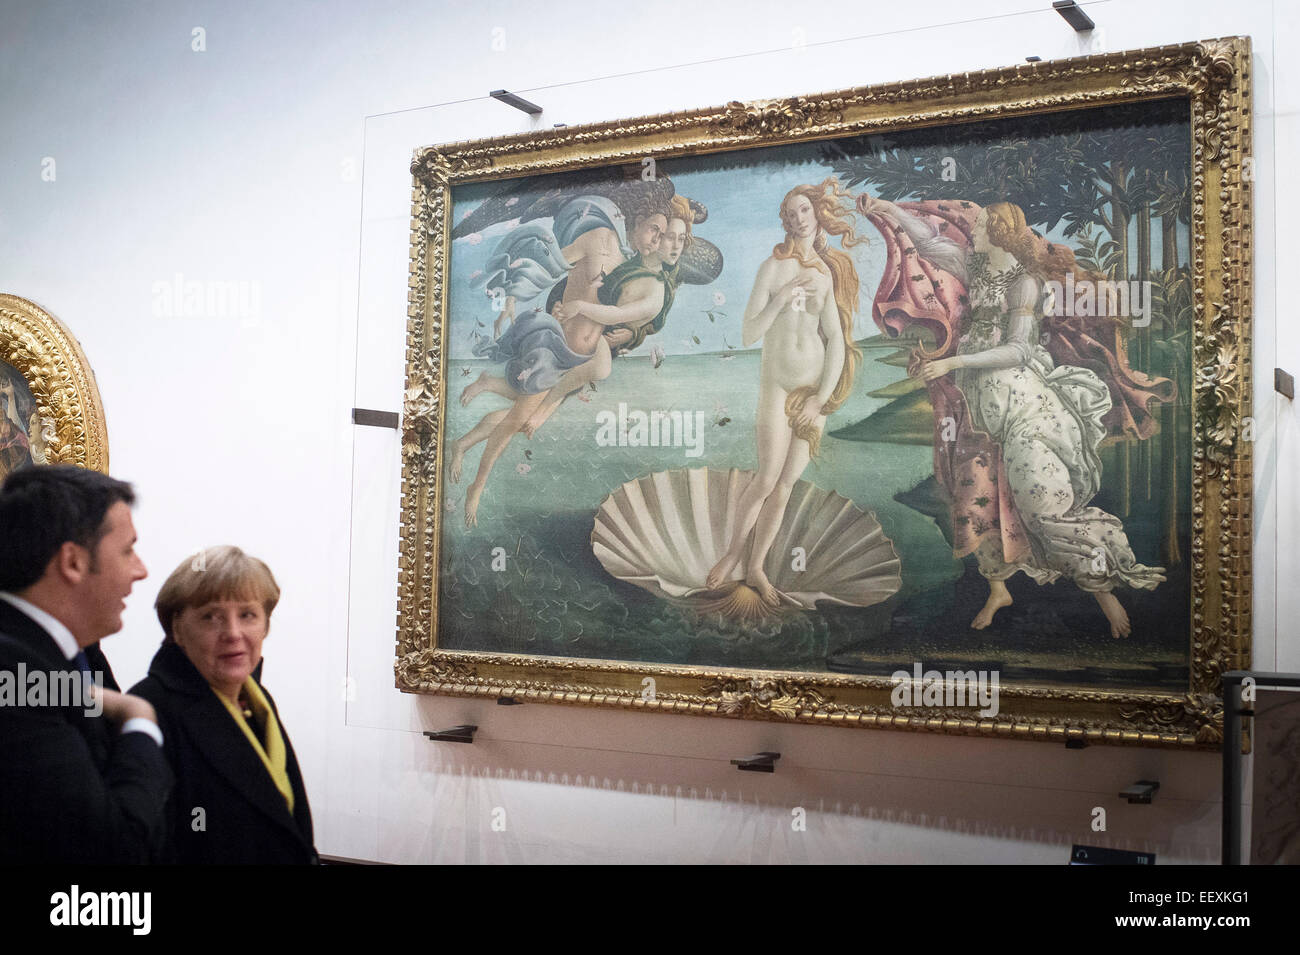 Florence, Italy. 22nd Jan, 2015. HANDOUT - Chancellor Angela Merkel and the Italian Prime Minister Matteo Renzi look at the painting 'Birth of Venus' by Sandro Botticelli during a tour of the Uffizi Gallery in Florence, Italy, 22 January 2015. Photo: Bundesregierung/Bergmann/dpa ( in connection with current reporting and with mandaory source credit: 'Photo: Bundesregierung/Bergmann/dpa') - NO WIRE SERVICE -/dpa/Alamy Live News Stock Photo